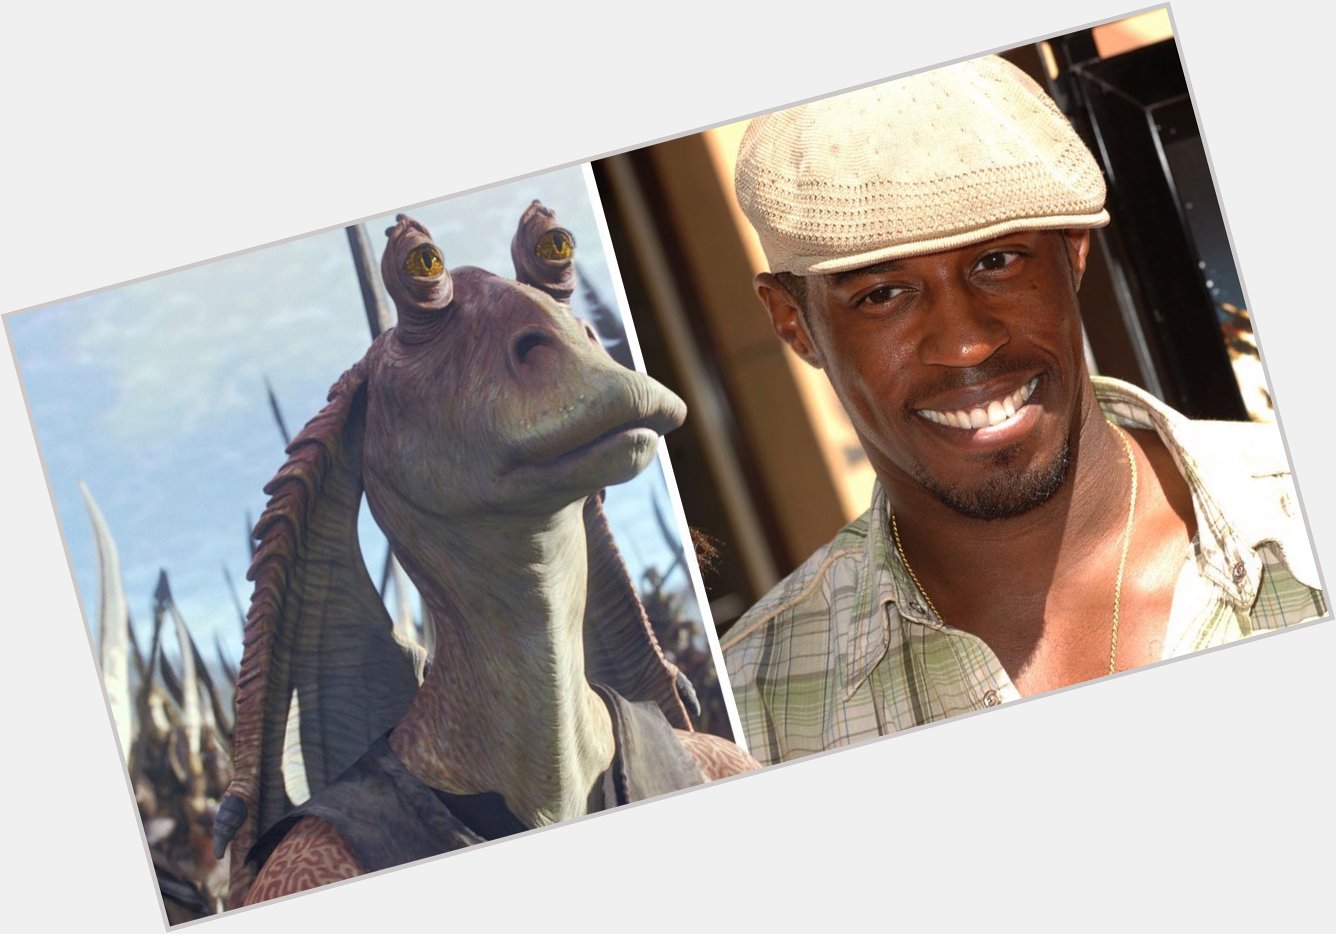 Happy birthday to the actor Ahmed Best who played the most funniest and underrated character in Star Wars! 